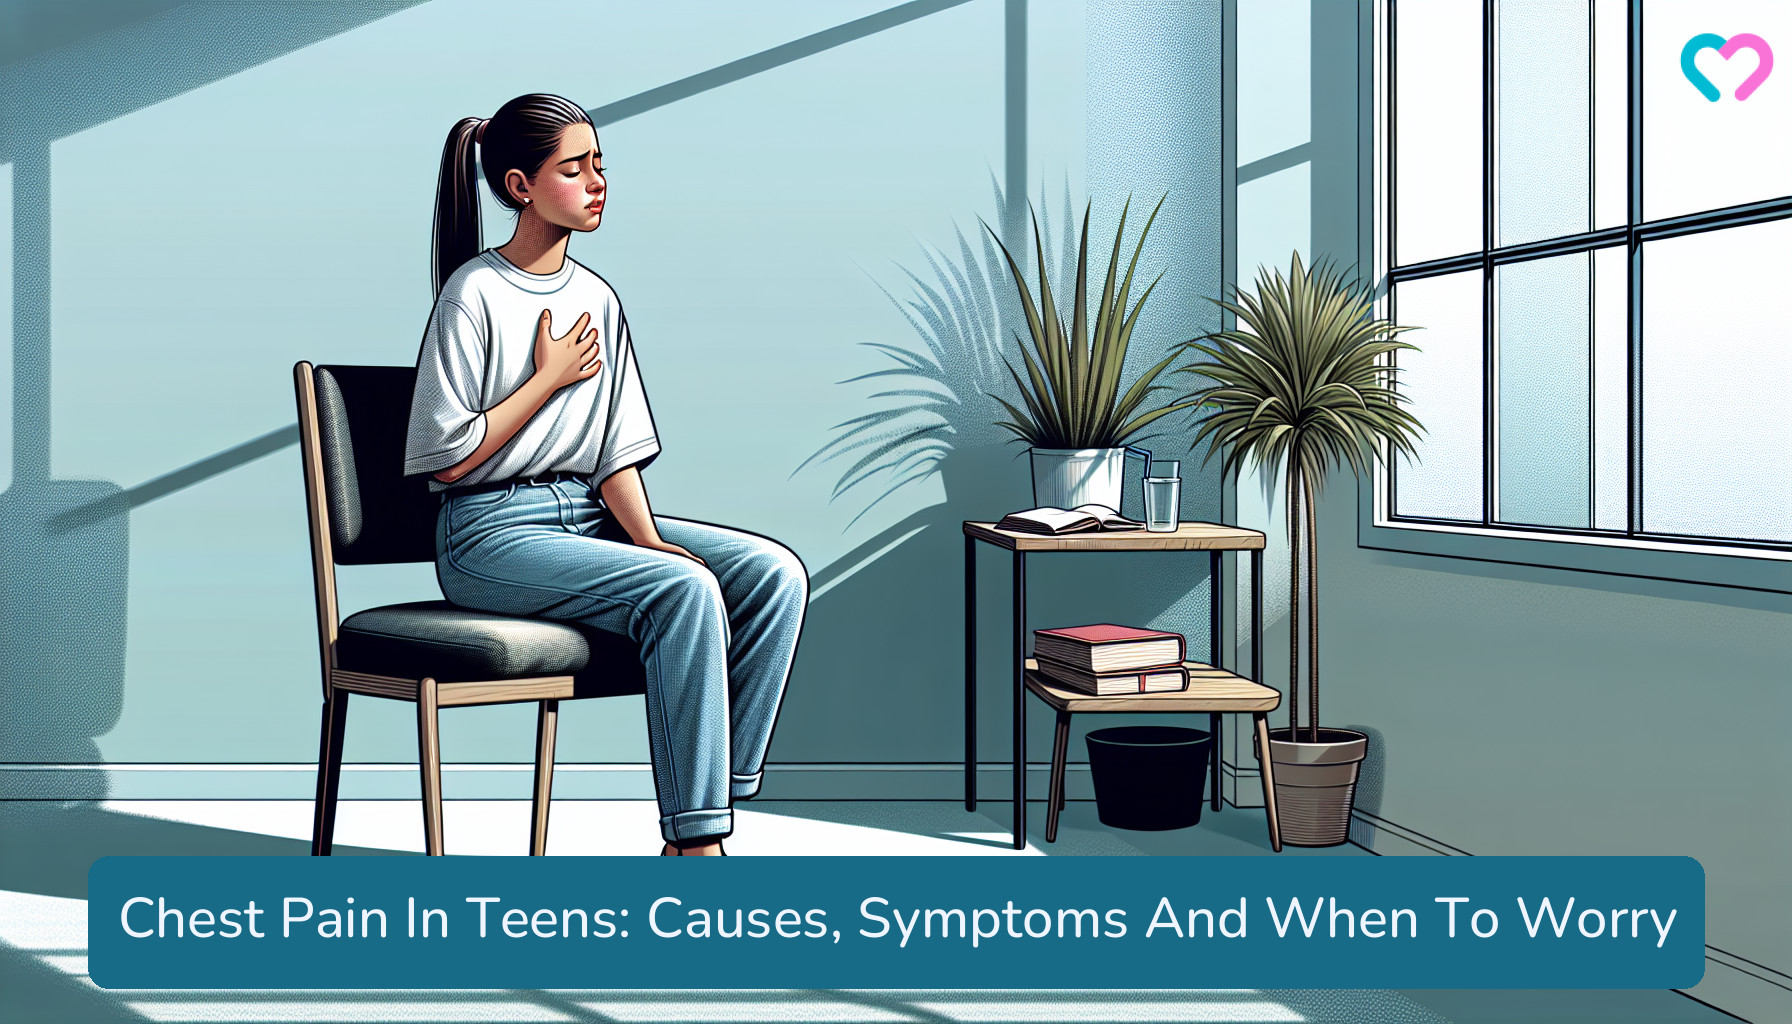 Chest Pain In Teens_illustration